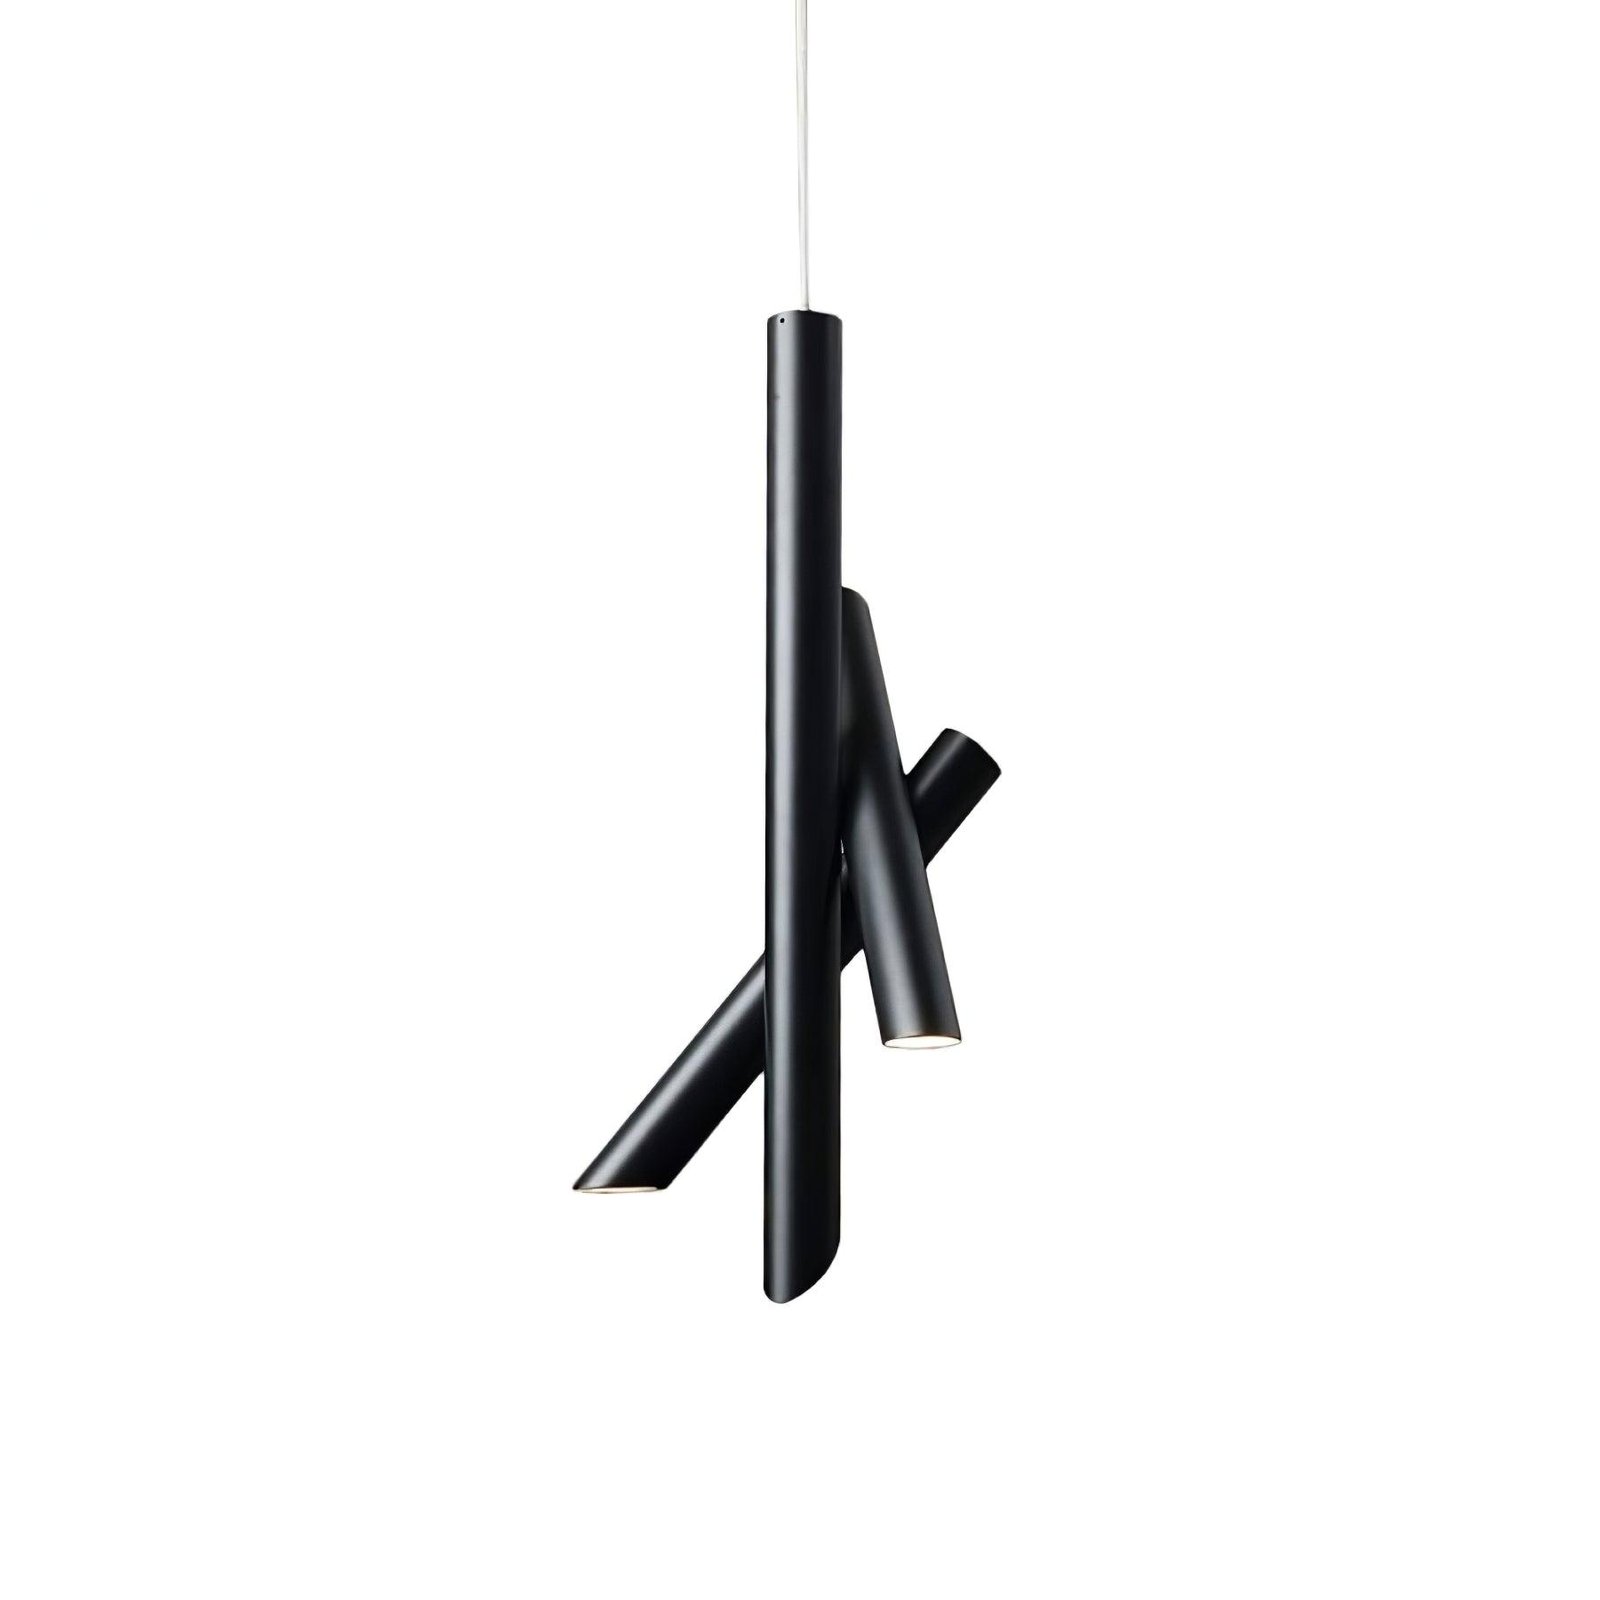 Black Cool Light Tubes Pendant Light with a diameter of 9.8 inches and a height of 19.6 inches (or 25cm x 50cm)